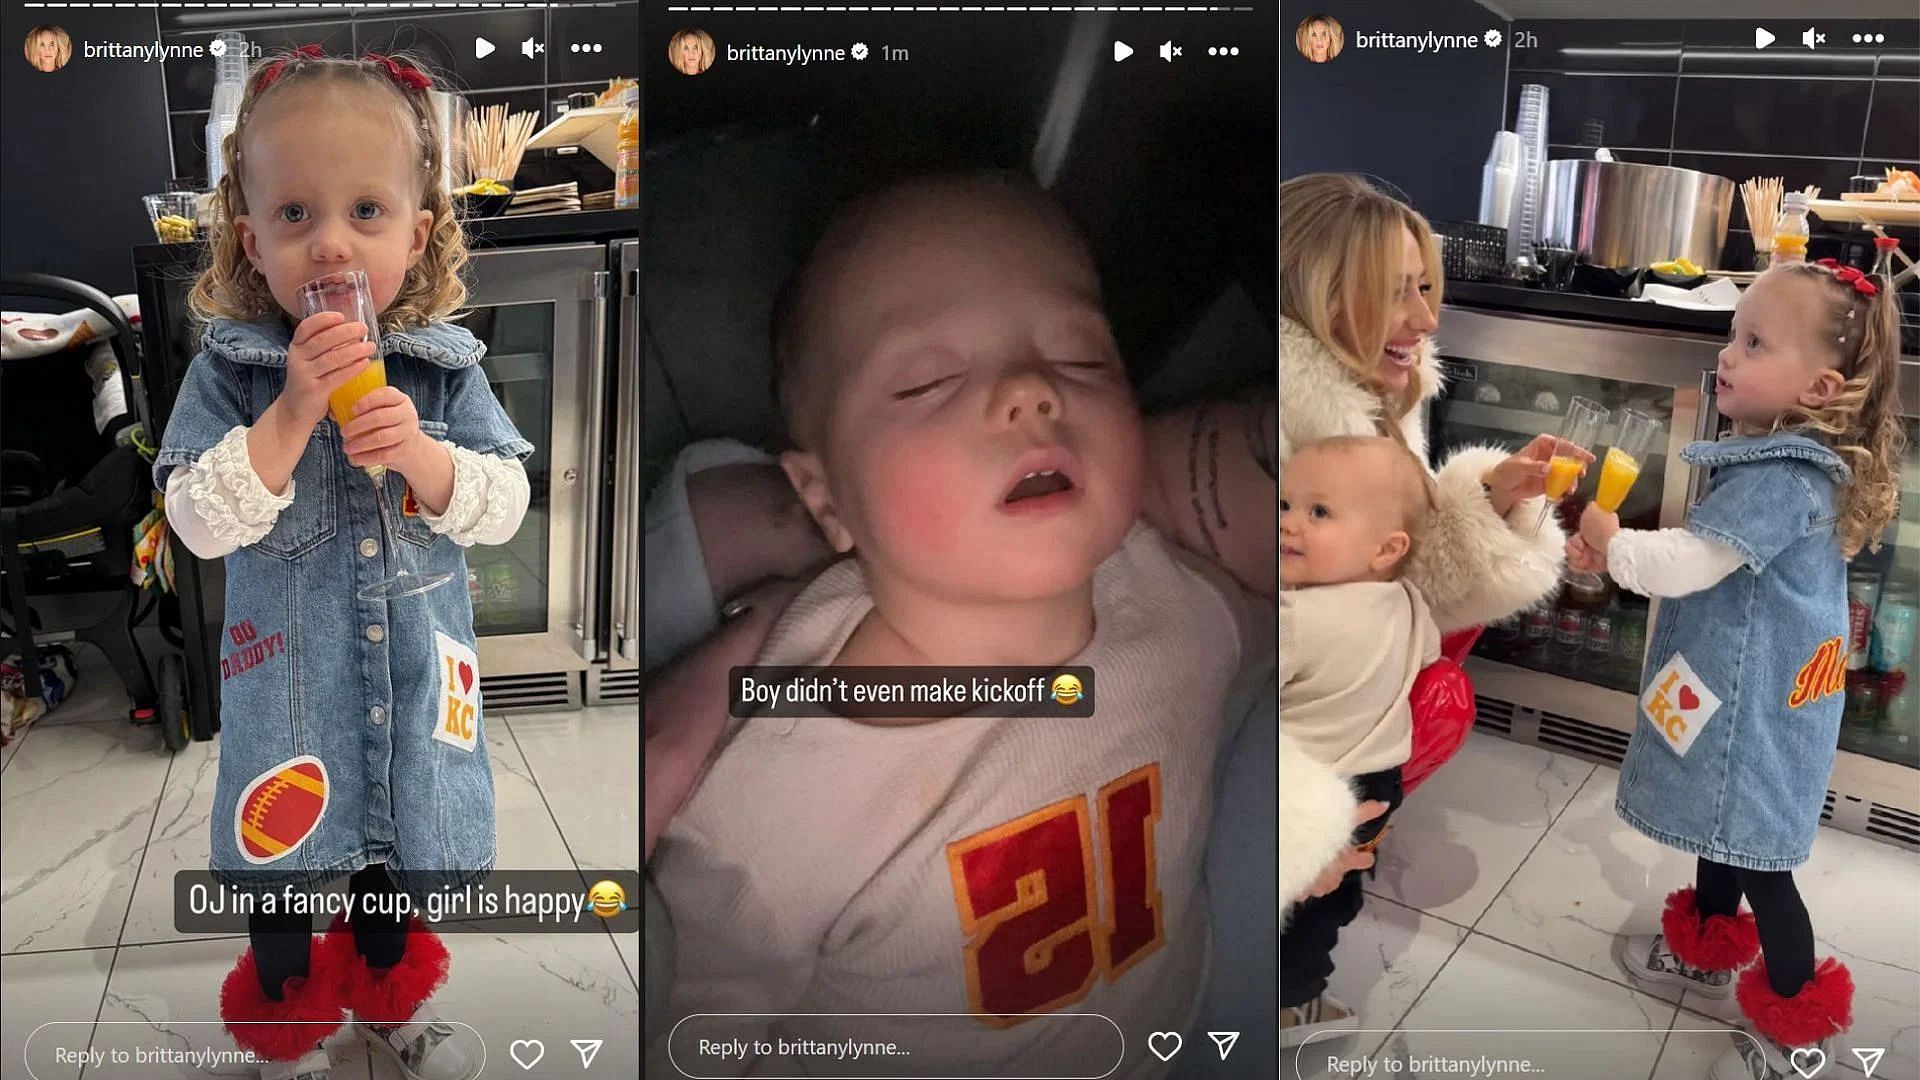 Patrick Mahomes' son Bronze dozes off ahead of the kickoff (Credit: @brittanylynne IG)